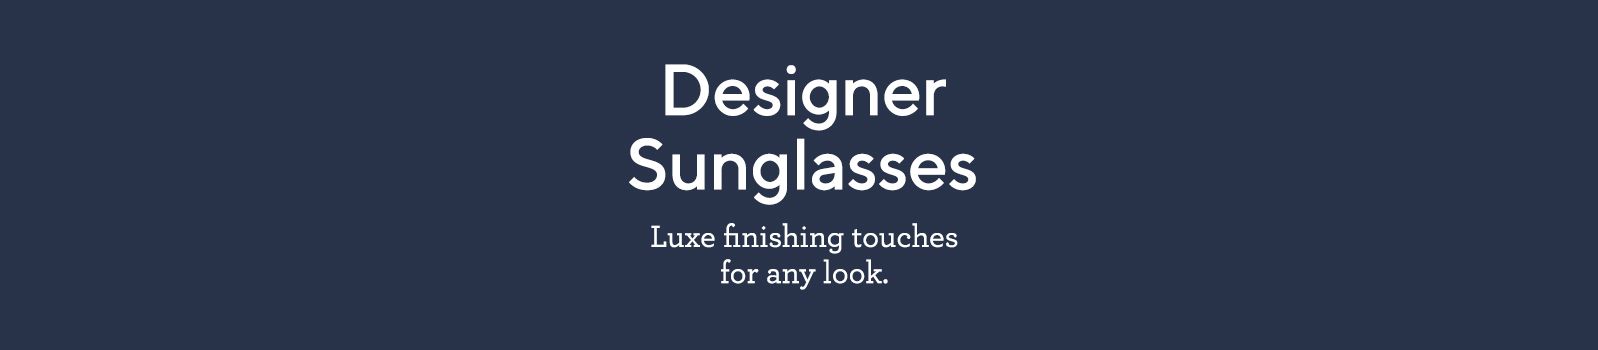 Designer Sunglasses. Luxe finishing touches for any look. 